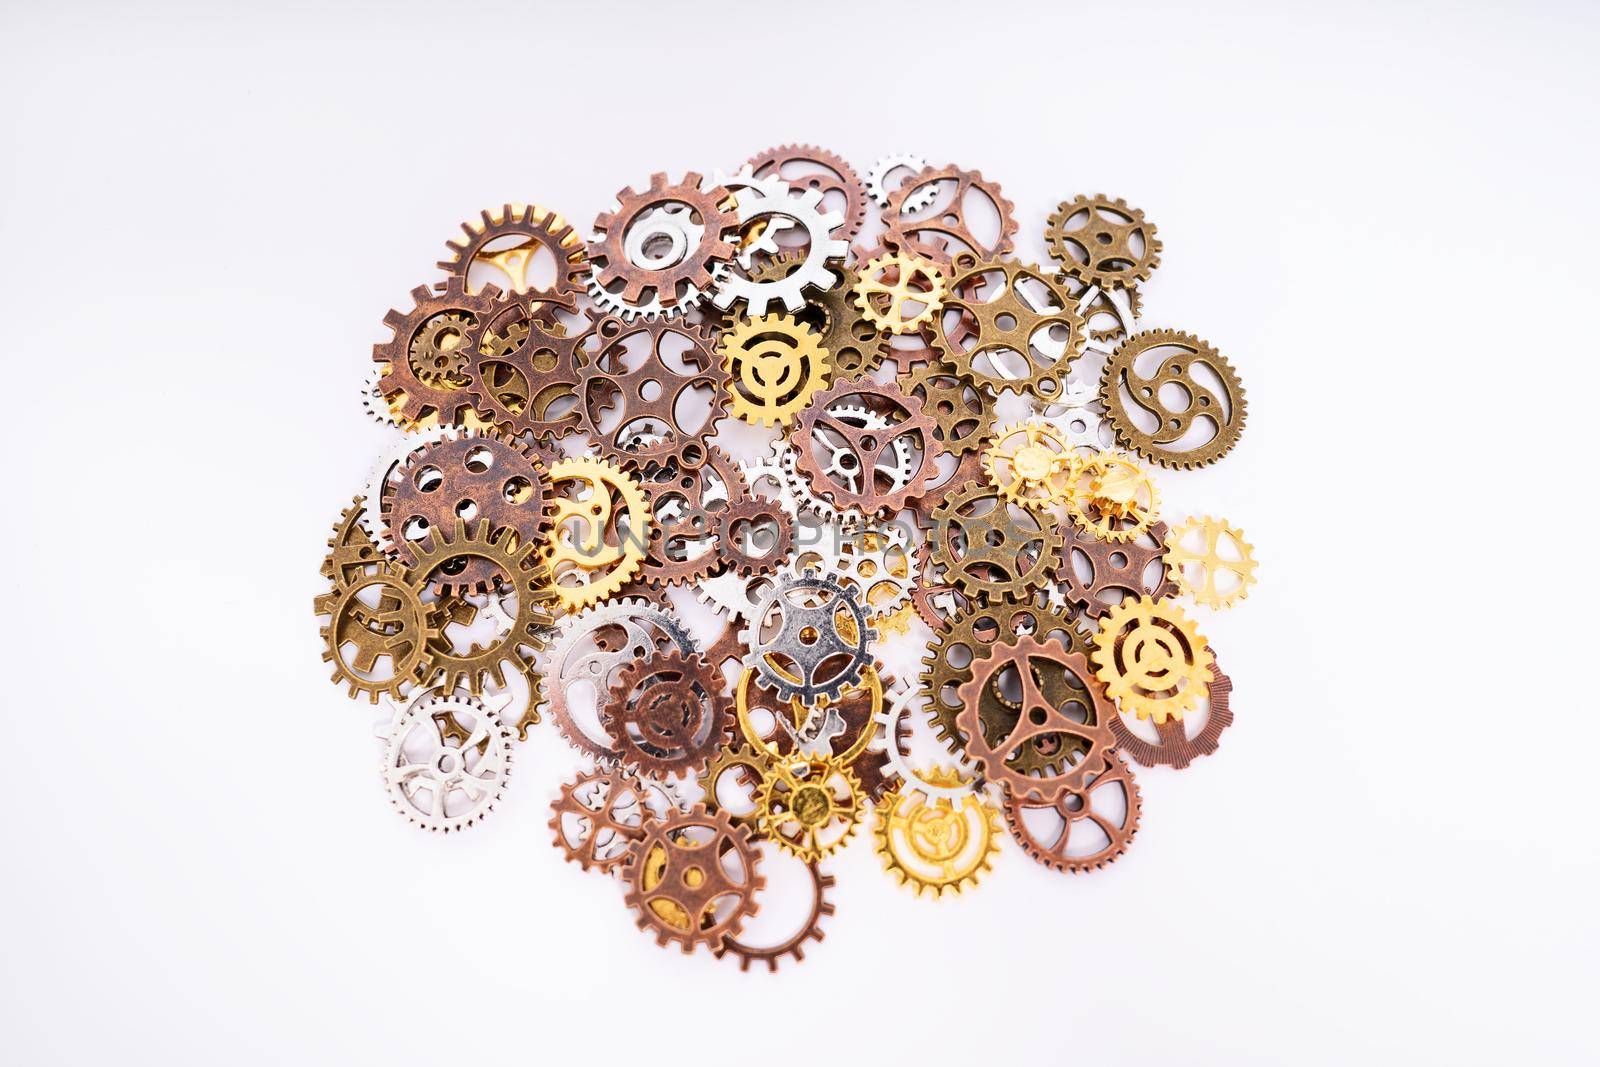 A pile of gear wheels and cogs in different colors. Future, gear, wheel, metal. Industrial concept.